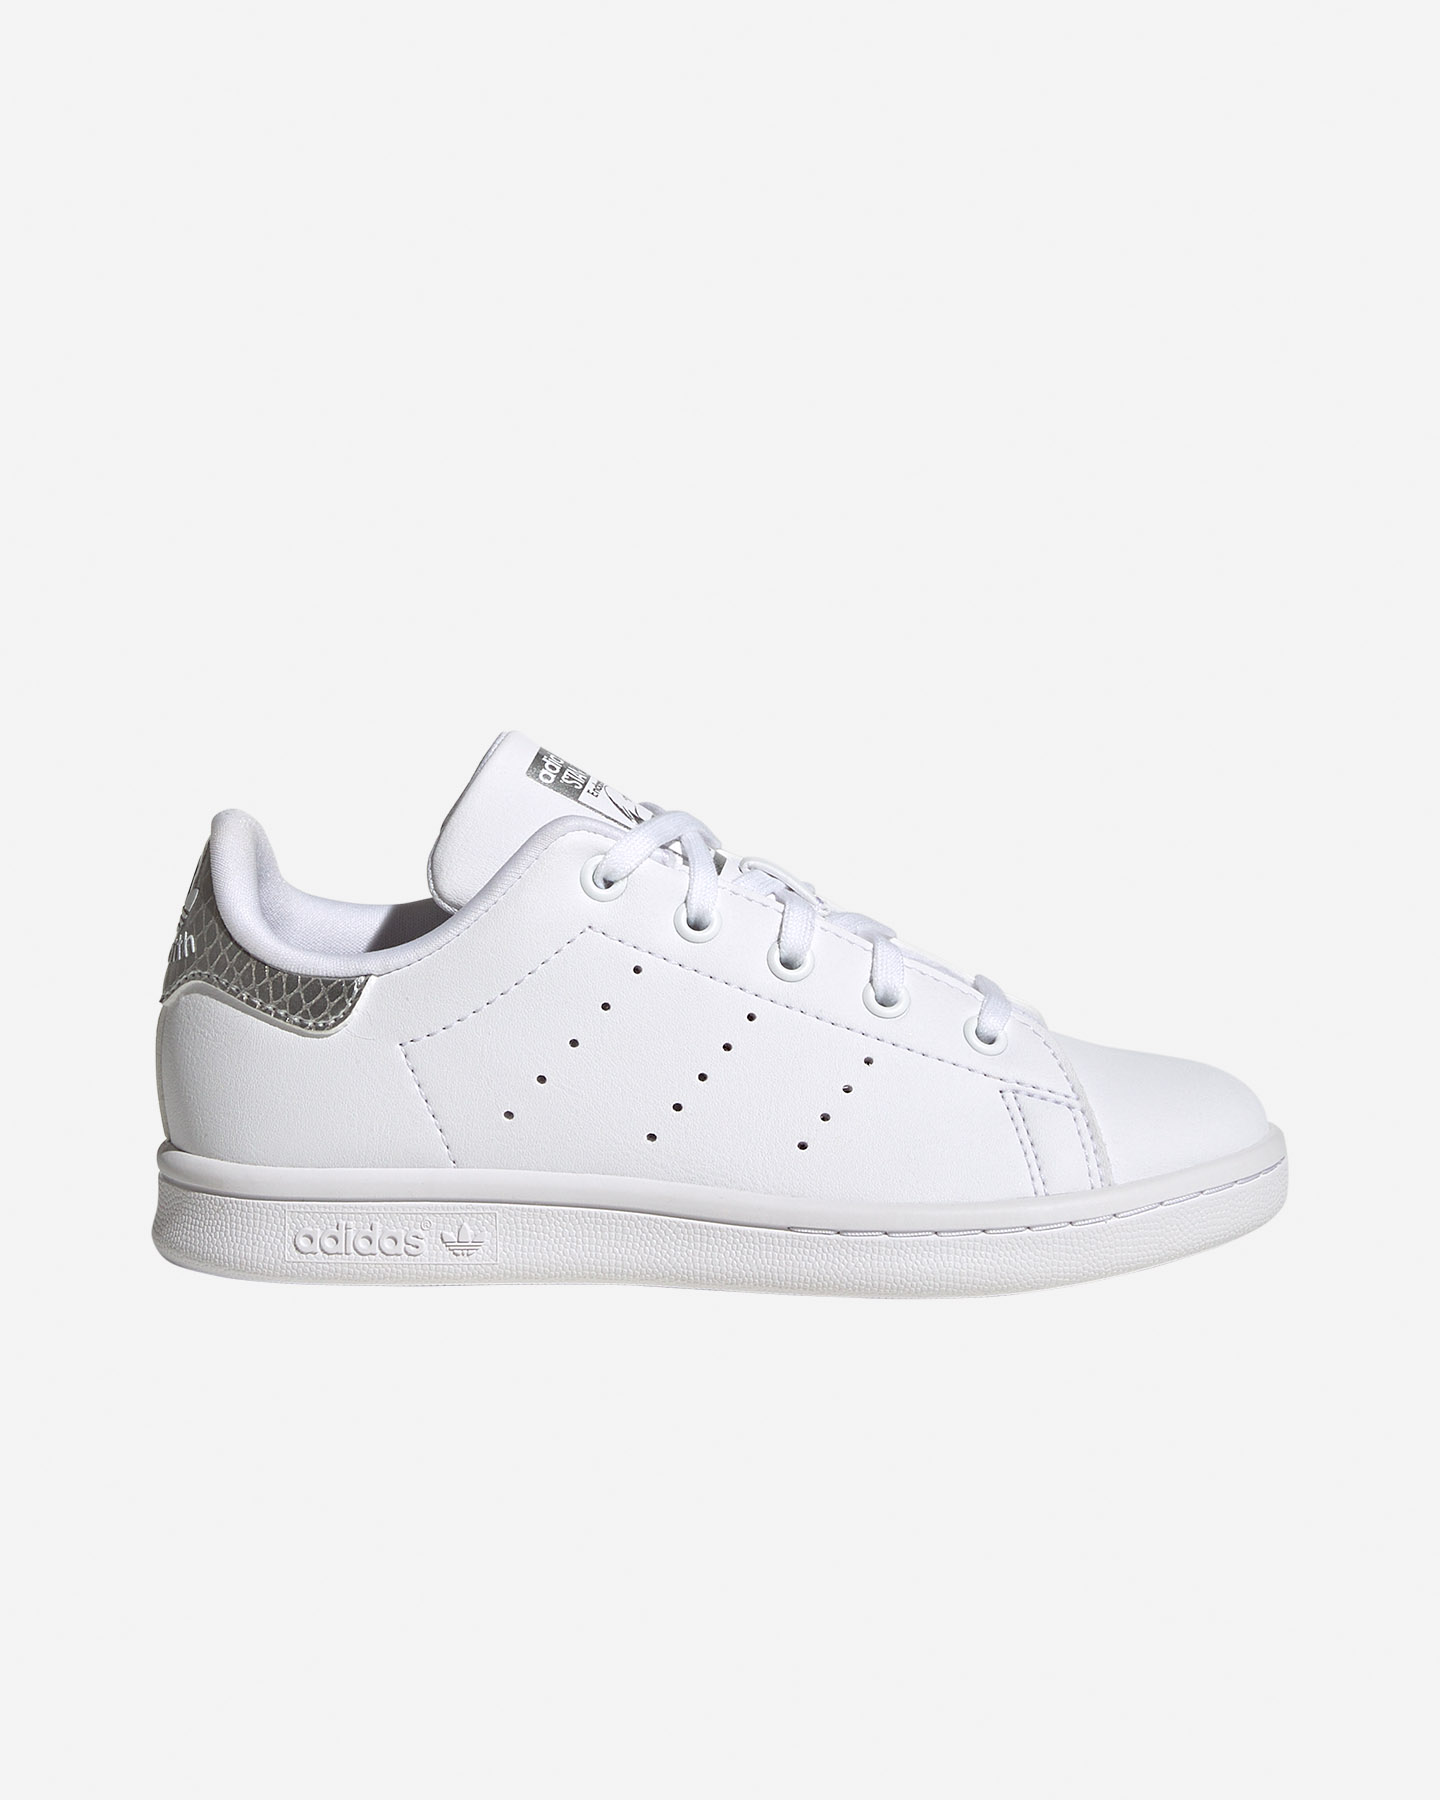 Image of Adidas Stansmith Ps Jr - Scarpe Sneakers